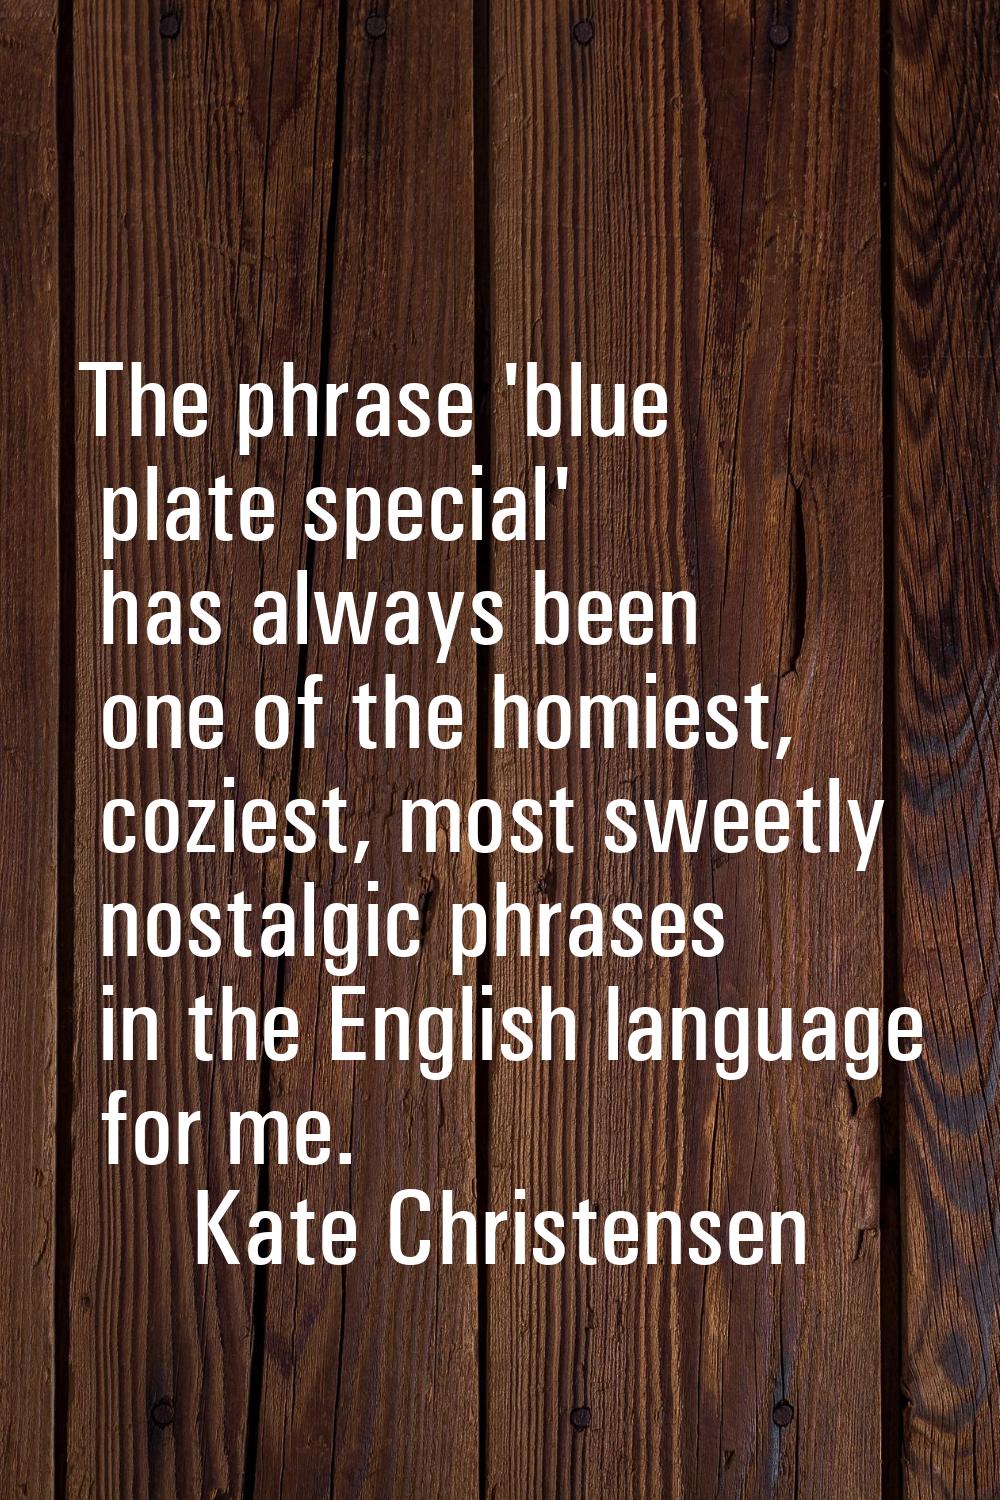 The phrase 'blue plate special' has always been one of the homiest, coziest, most sweetly nostalgic